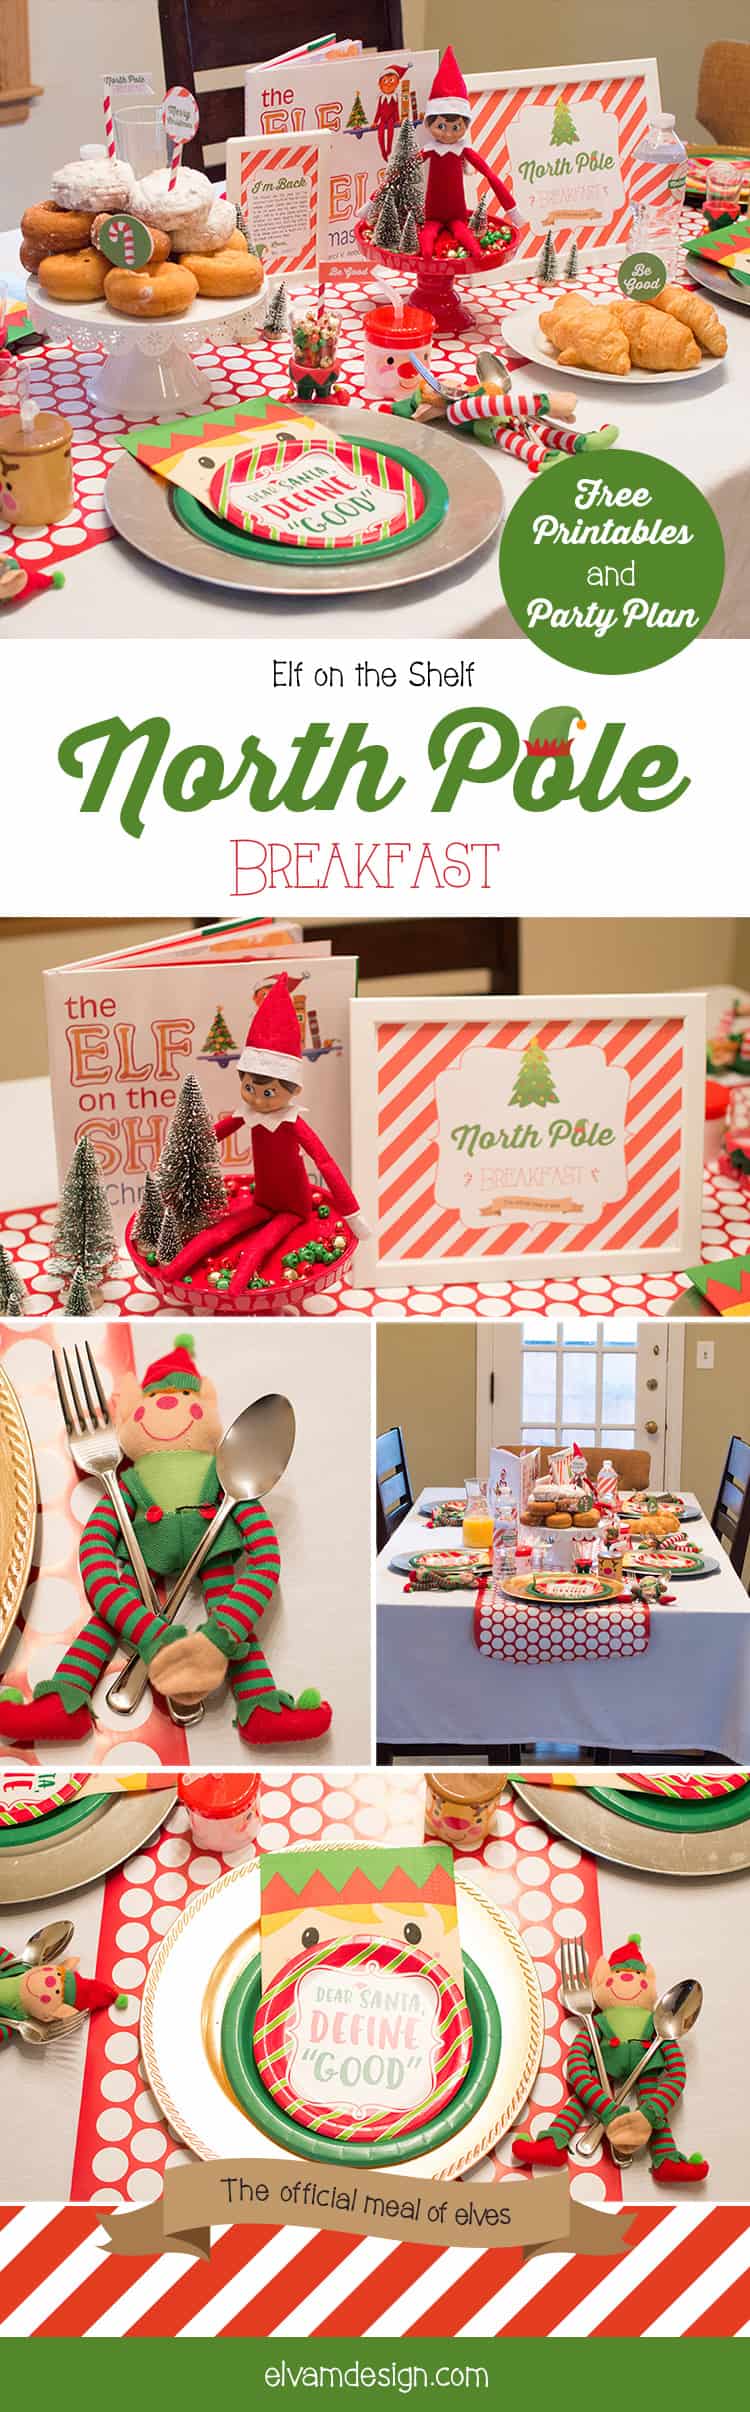 Elf on the Shelf North Pole Breakfast Party